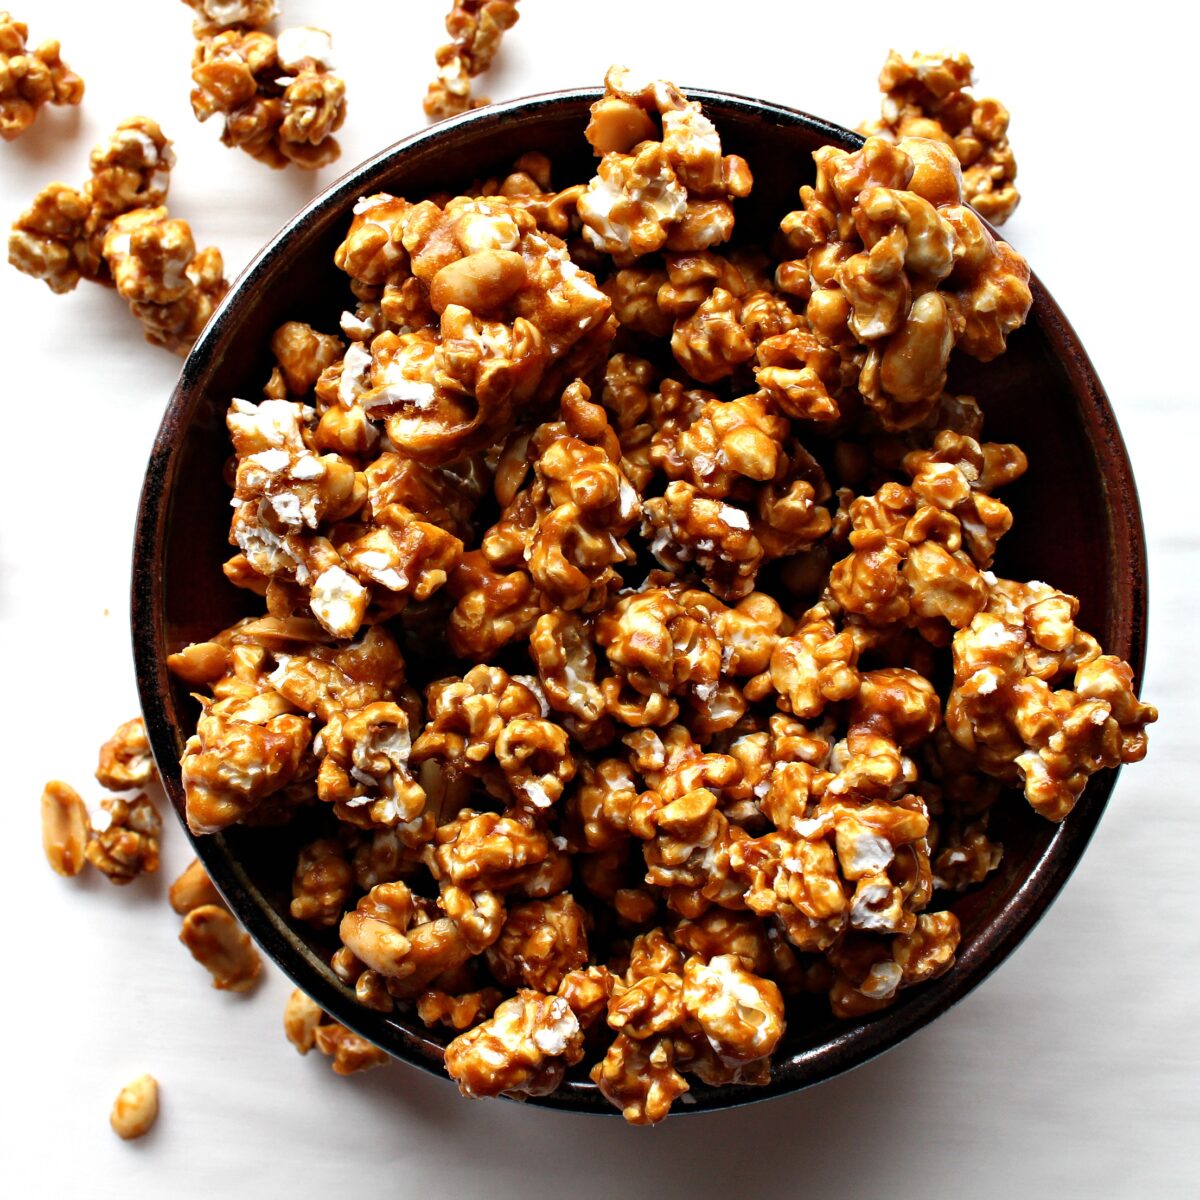 Caramel coated popcorn clusters with caramel coated peanuts.